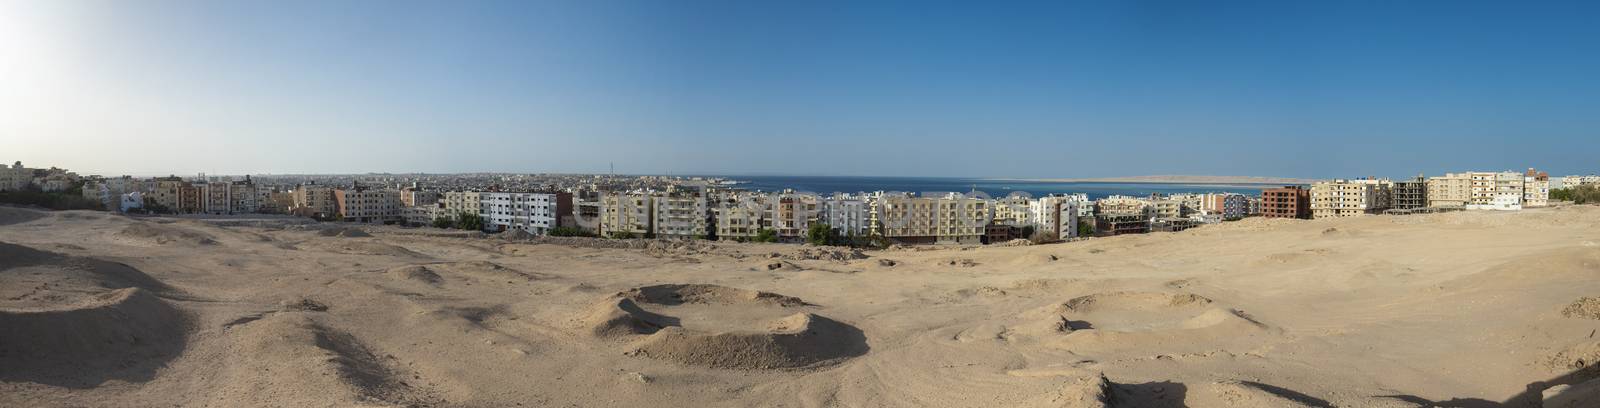 Panorama of large coastal town city with sea view on edge of arid harsh desert landscape